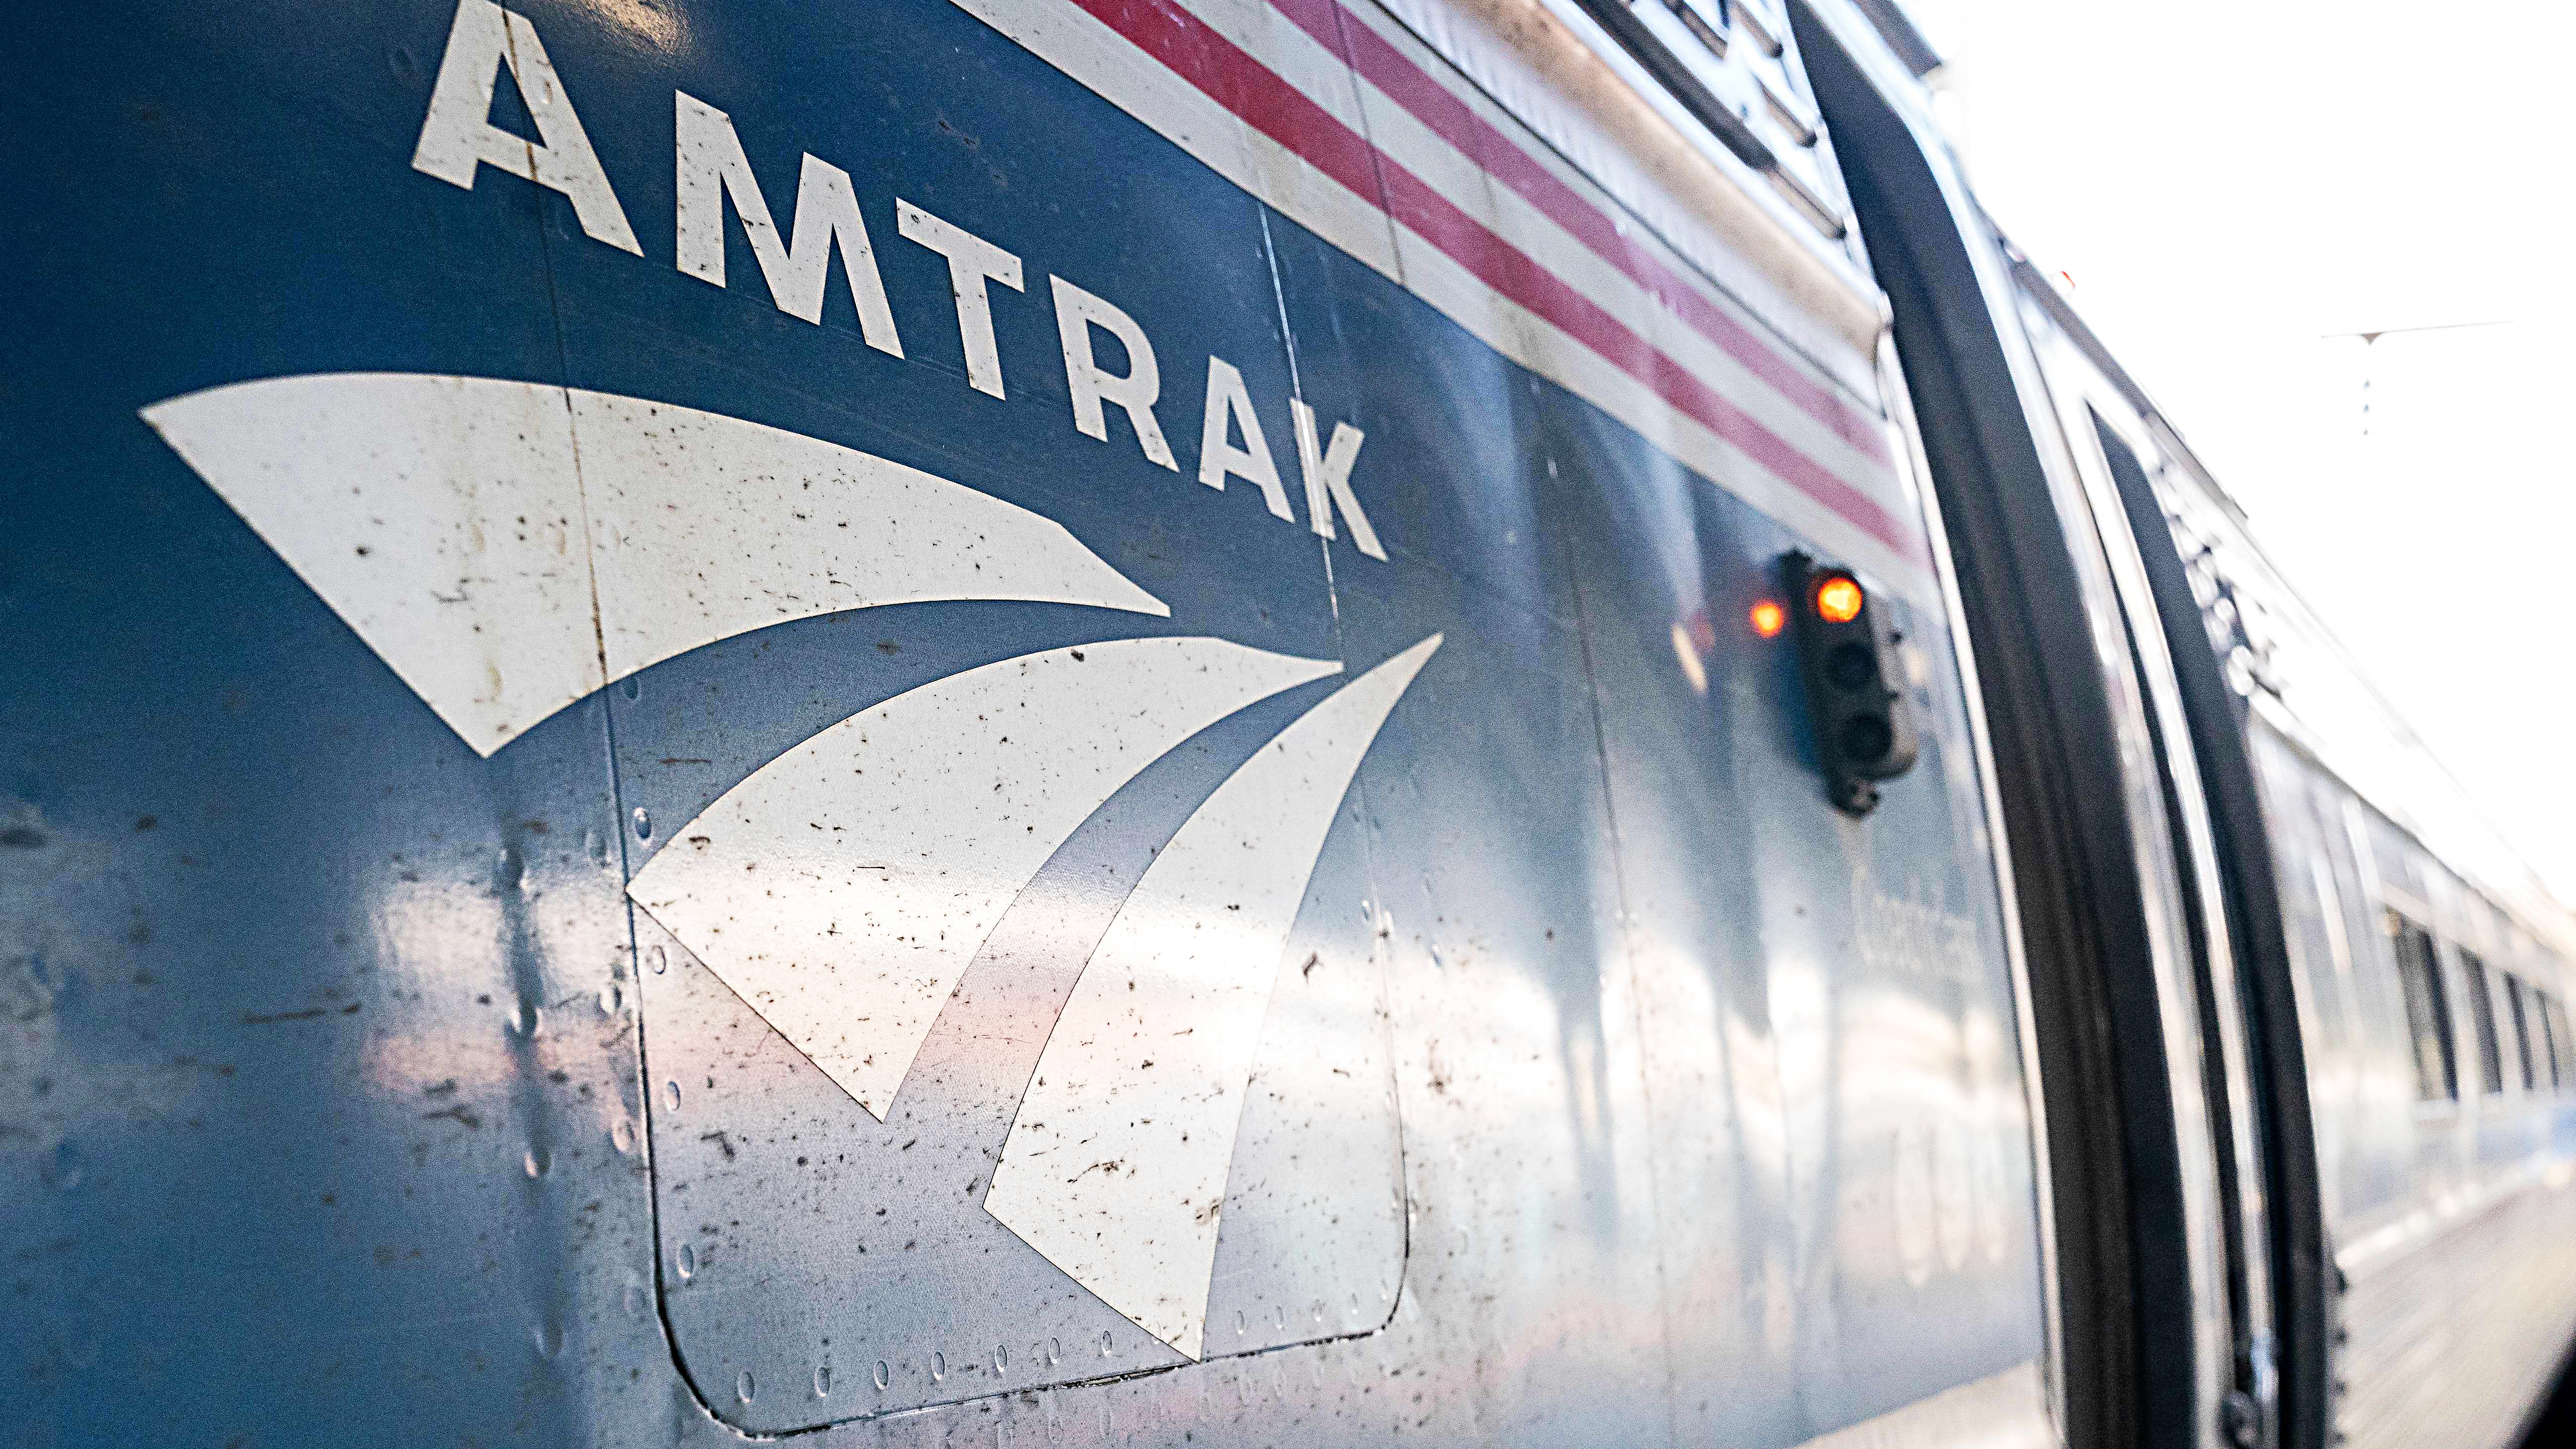 Driver Dies After Amtrak Train Strikes Vehicle in Wisconsin – NBC Chicago